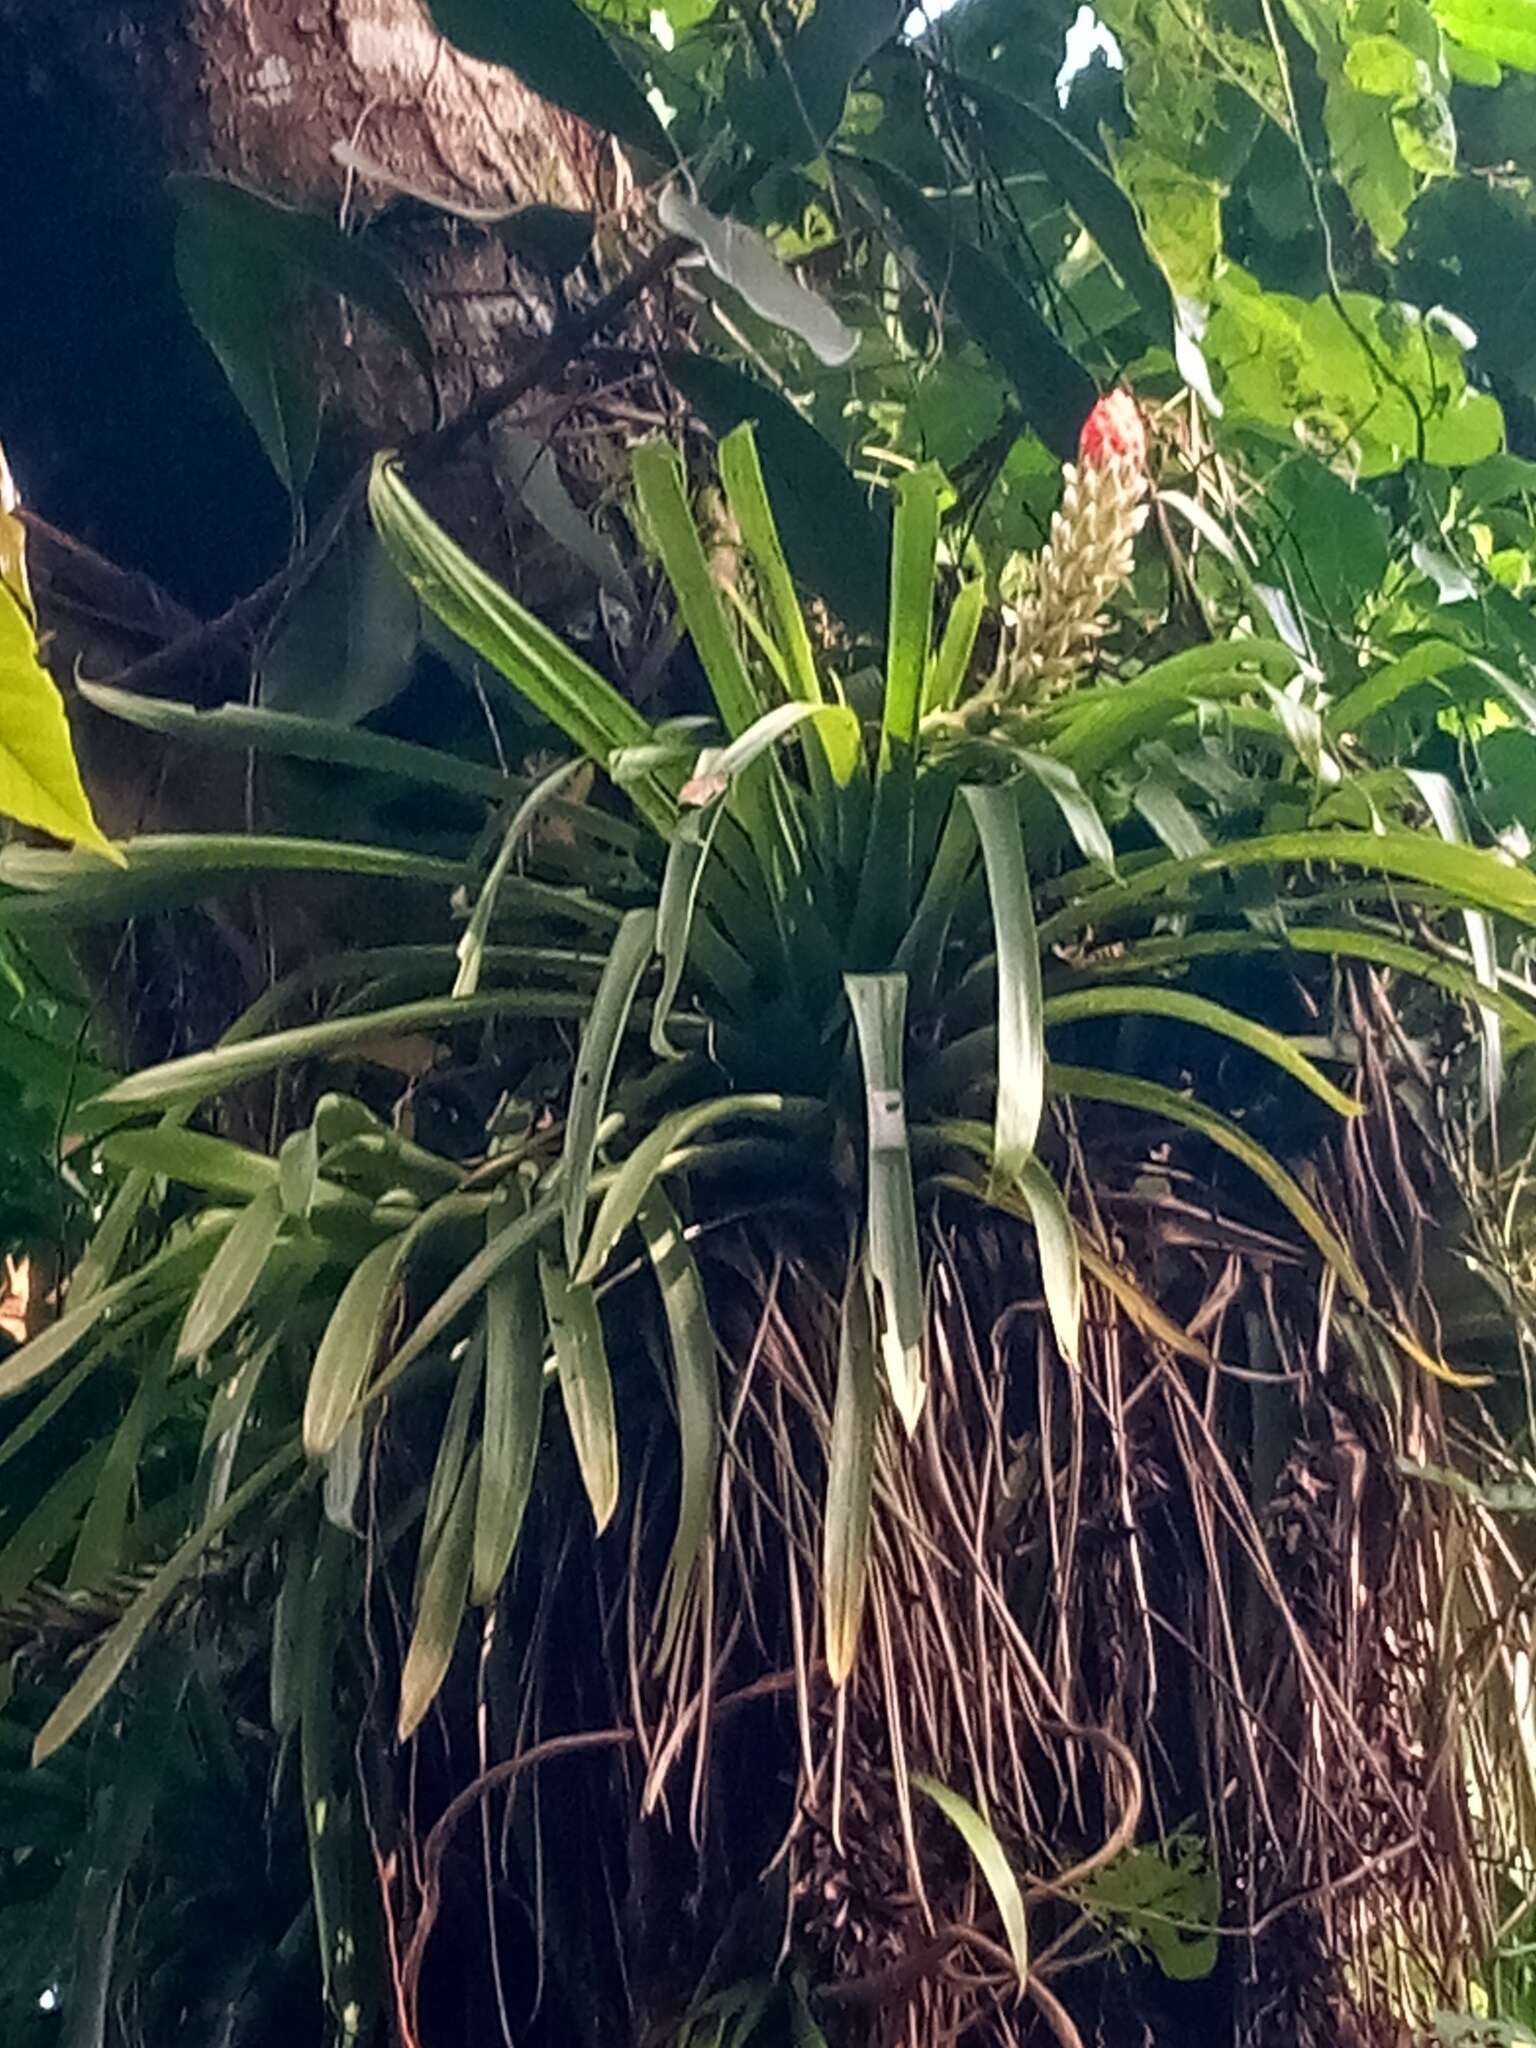 Image of West Indian tufted airplant